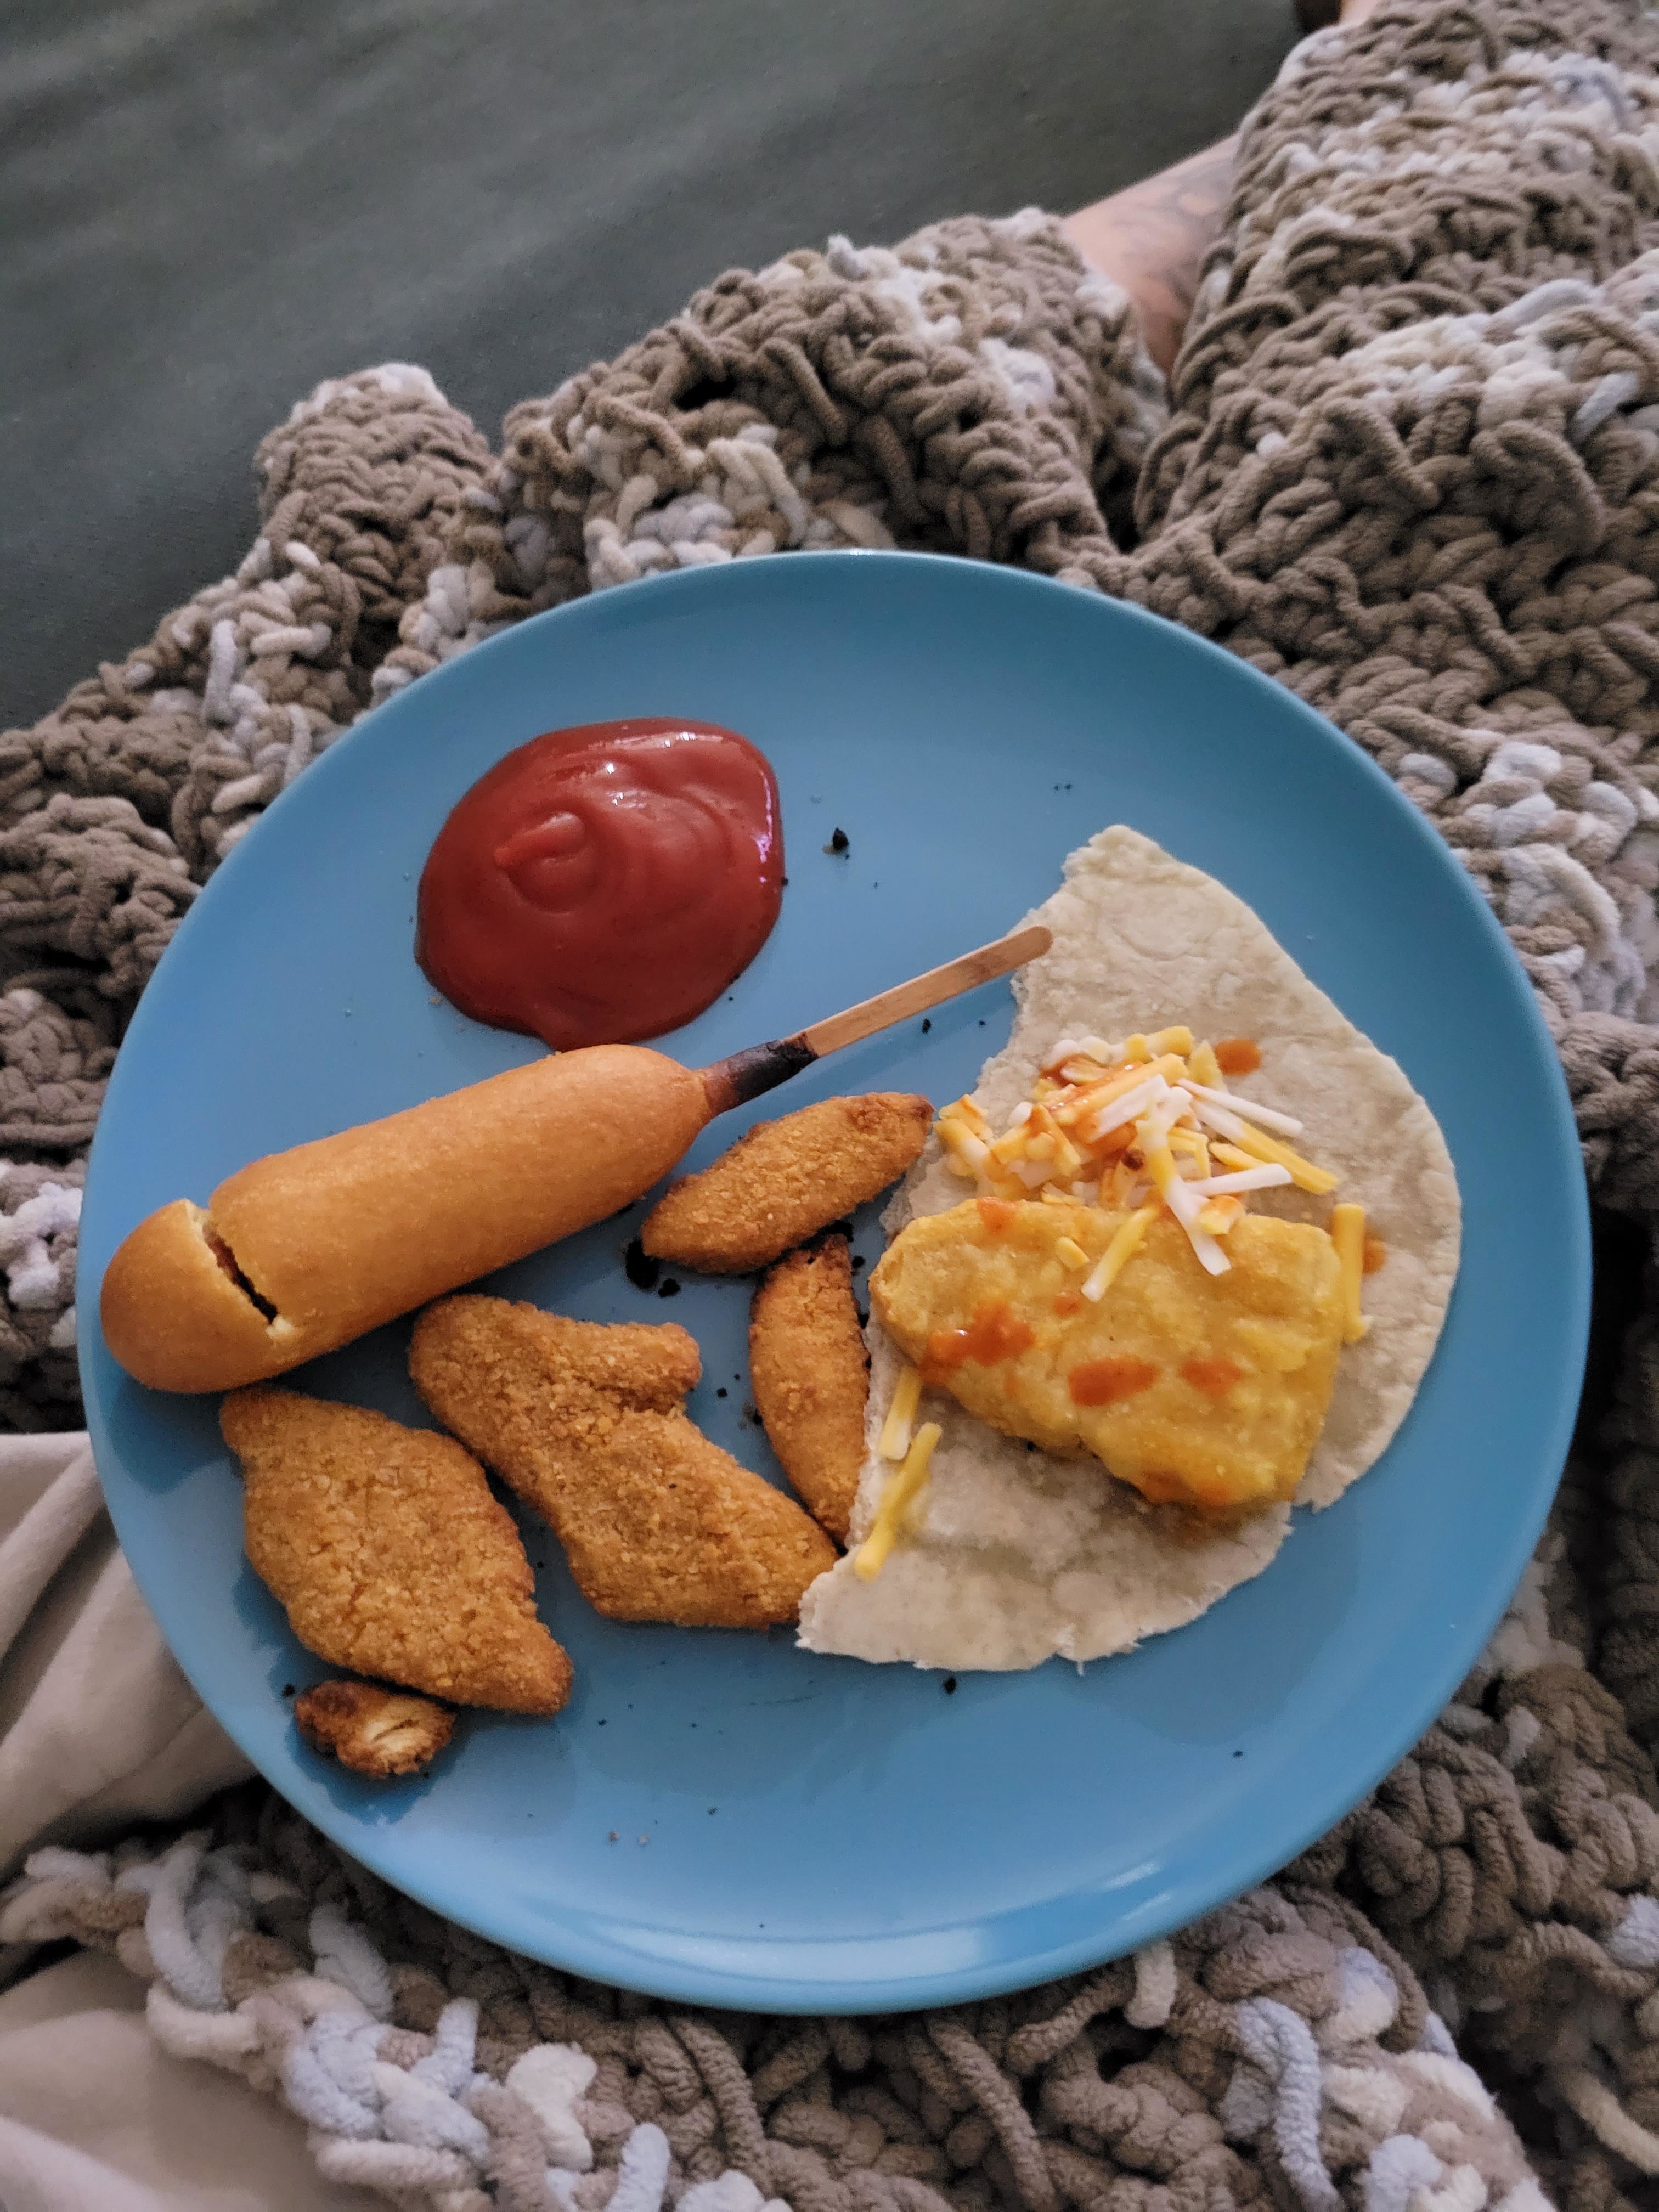 a plate with half a tortilla, a frozen fish piece, four chicken tenders, a broken corn dog, and some ketchup